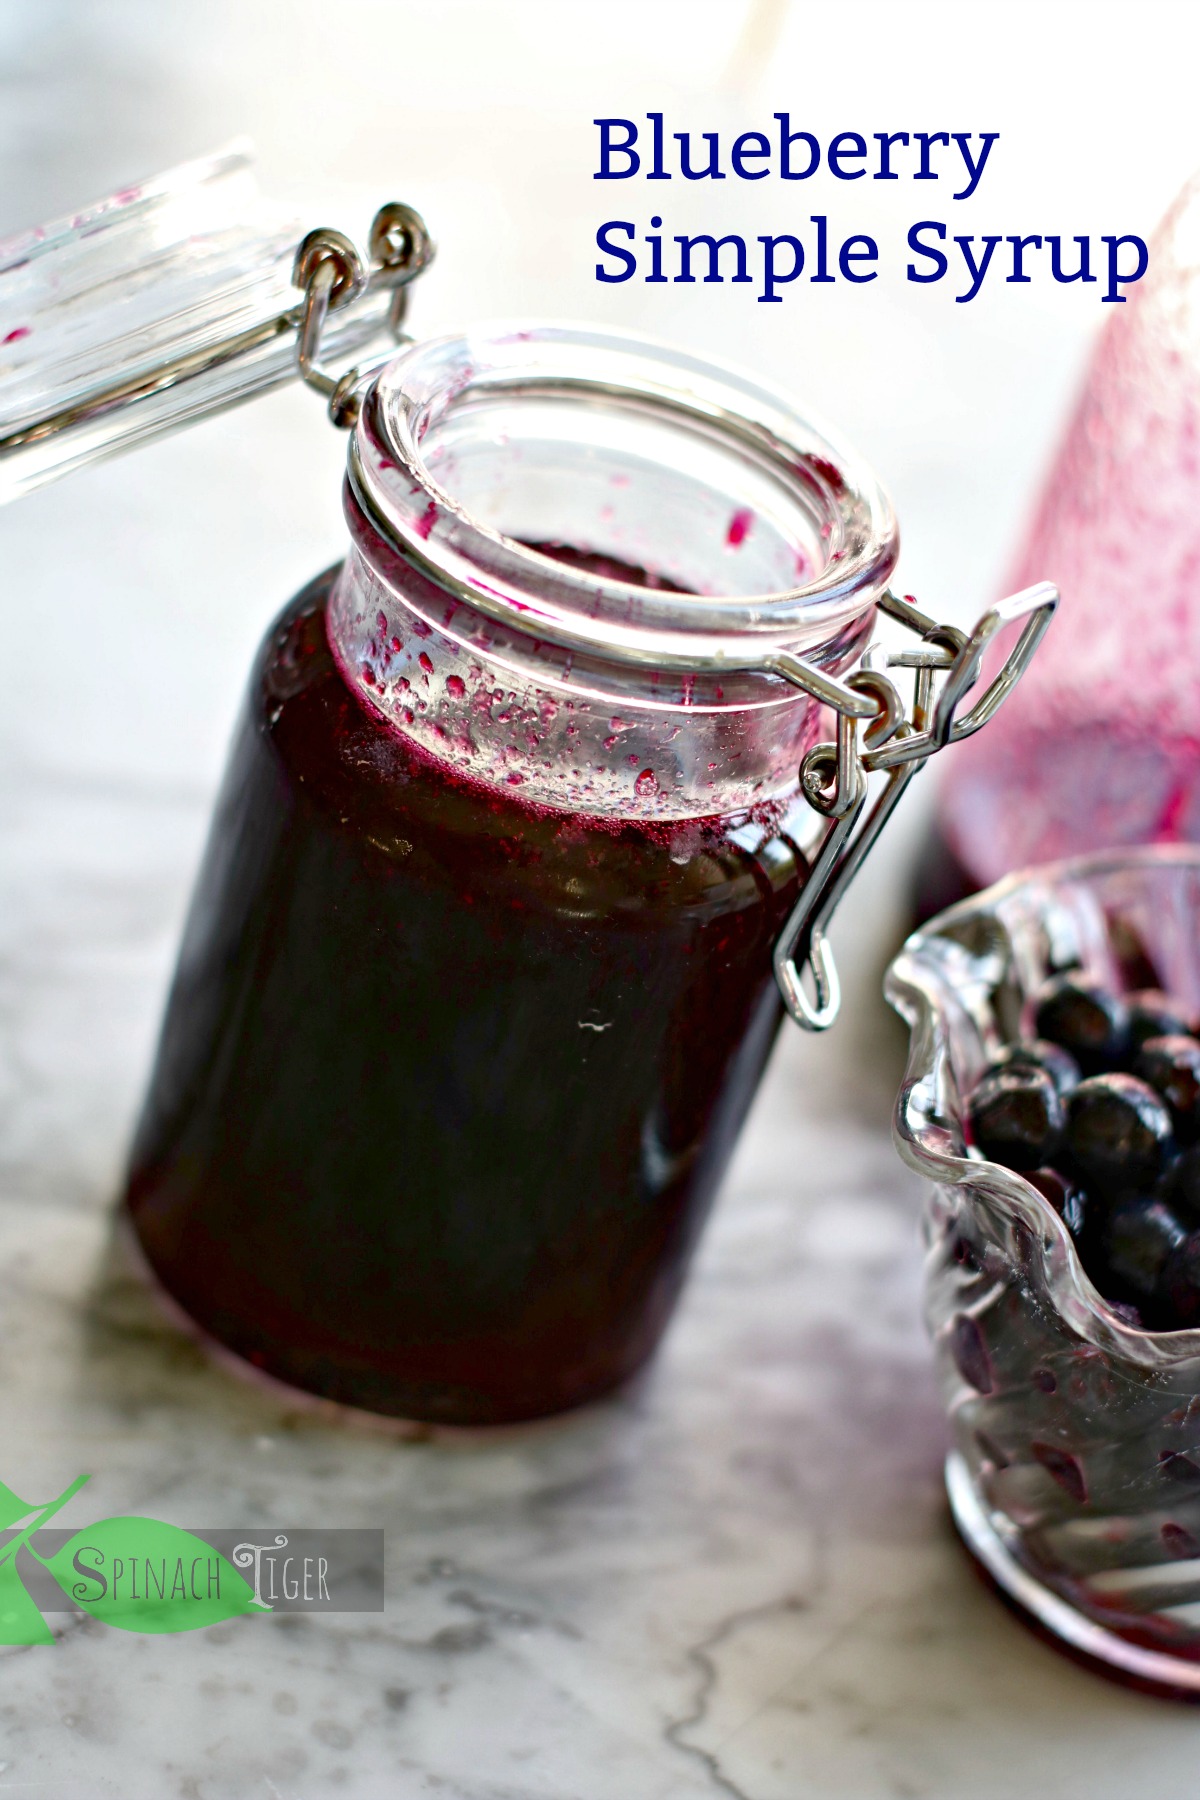 how to make blueberry simple syrup from Spinach Tiger